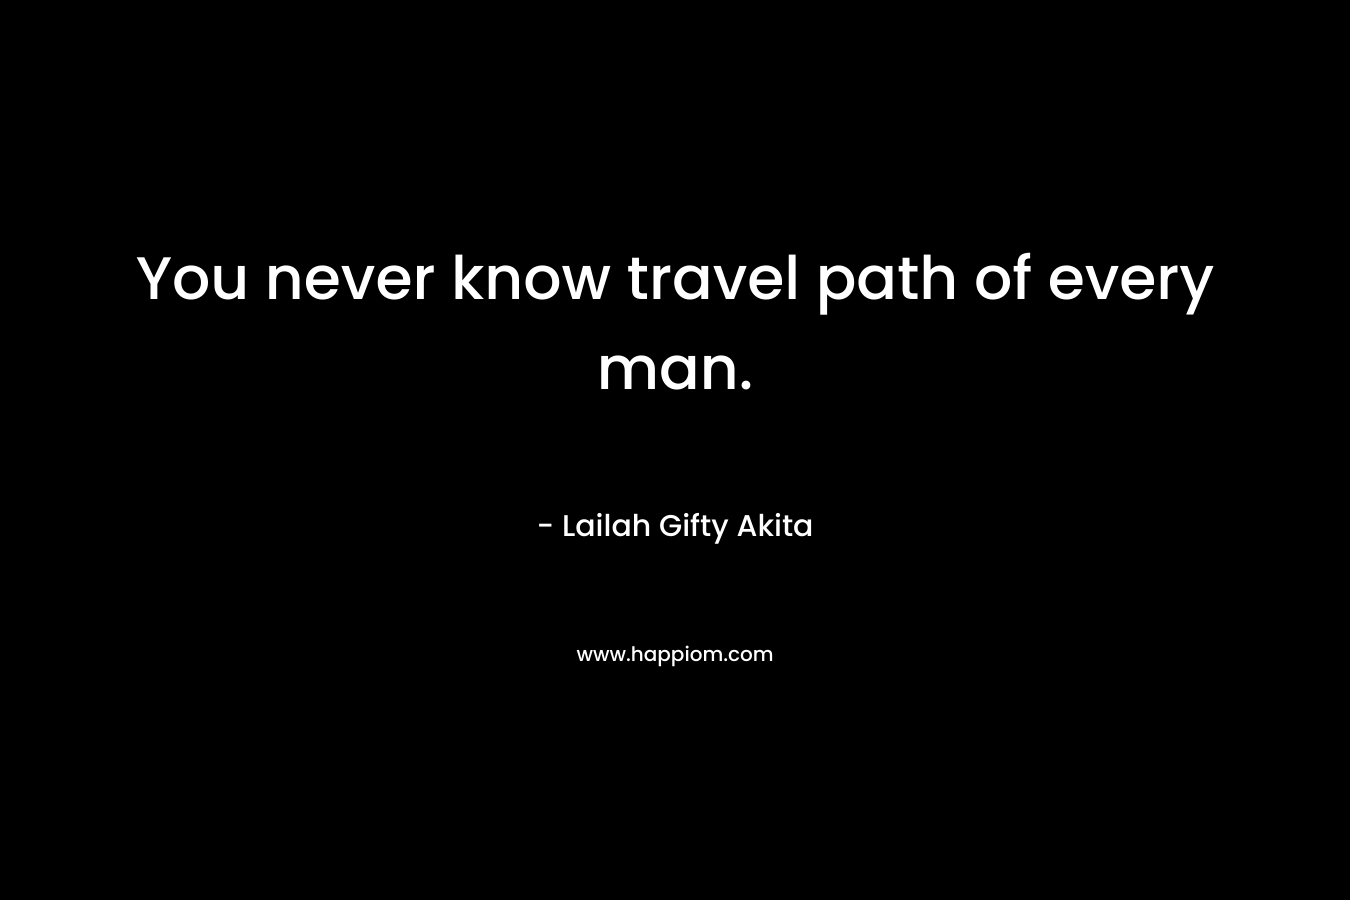 You never know travel path of every man.